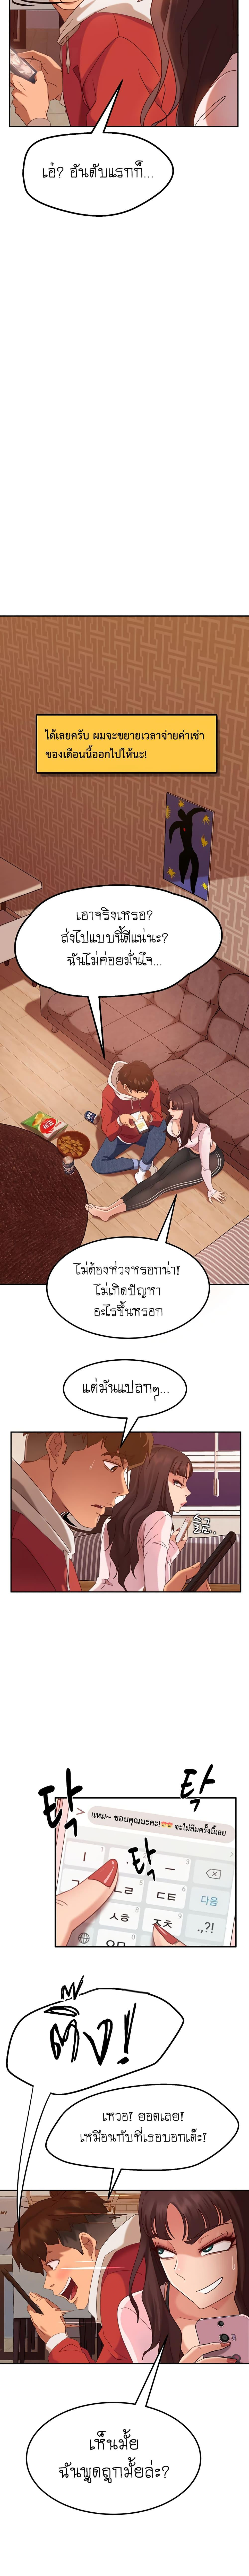 A Twisted Day 2 ภาพ 12